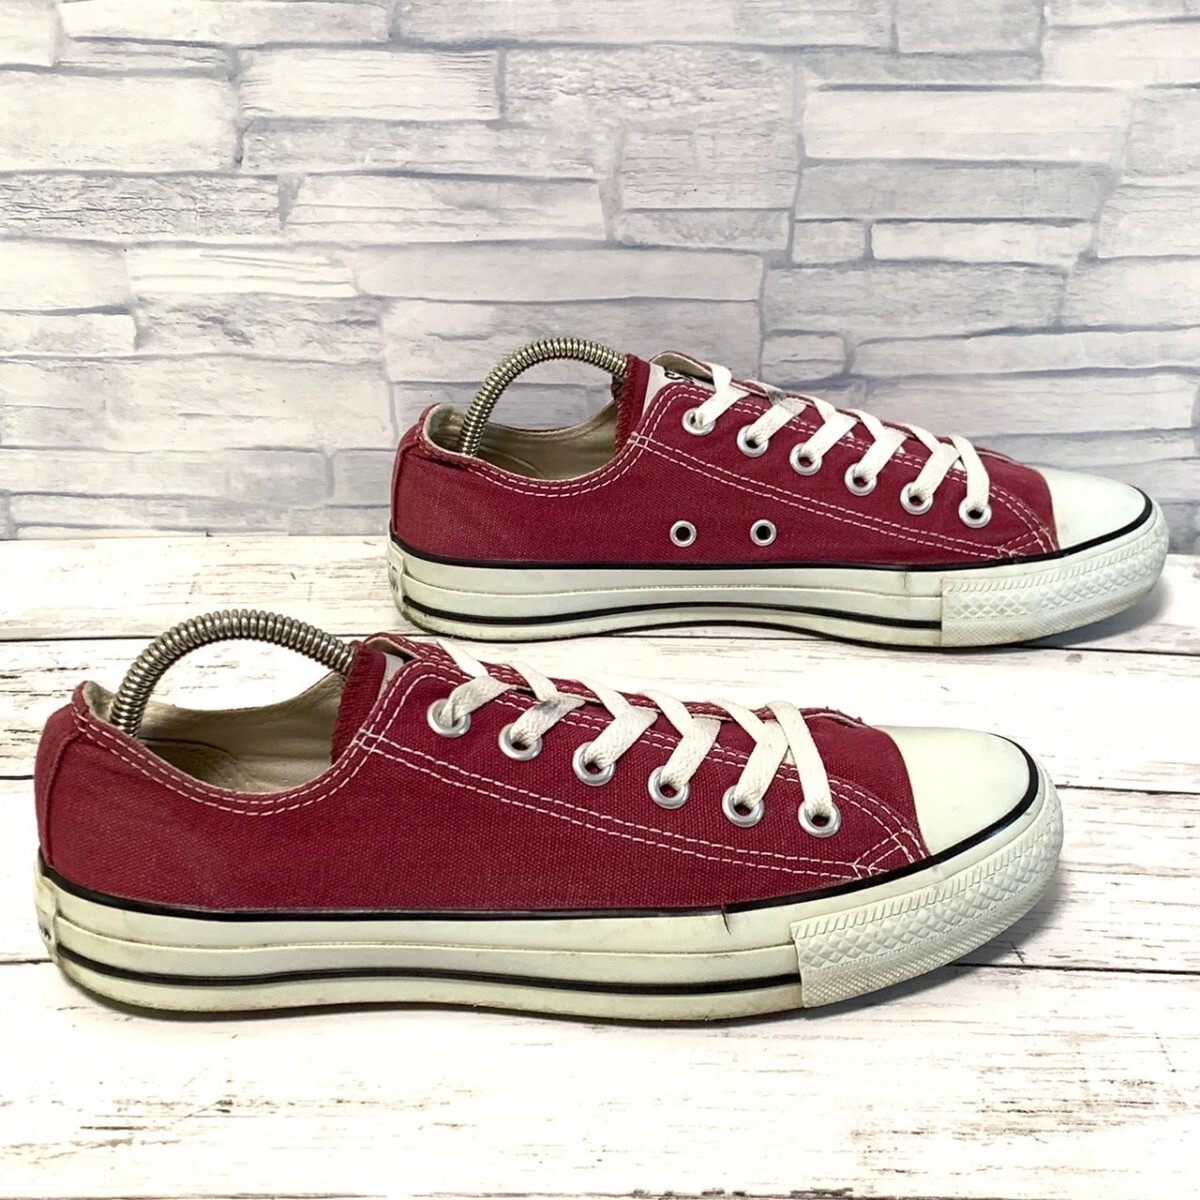 R6034bL CONVERSE Converse ALL STAR all Star OX men's 25cm low cut sneakers dark red wine bordeaux 1C030 canvas shoes 